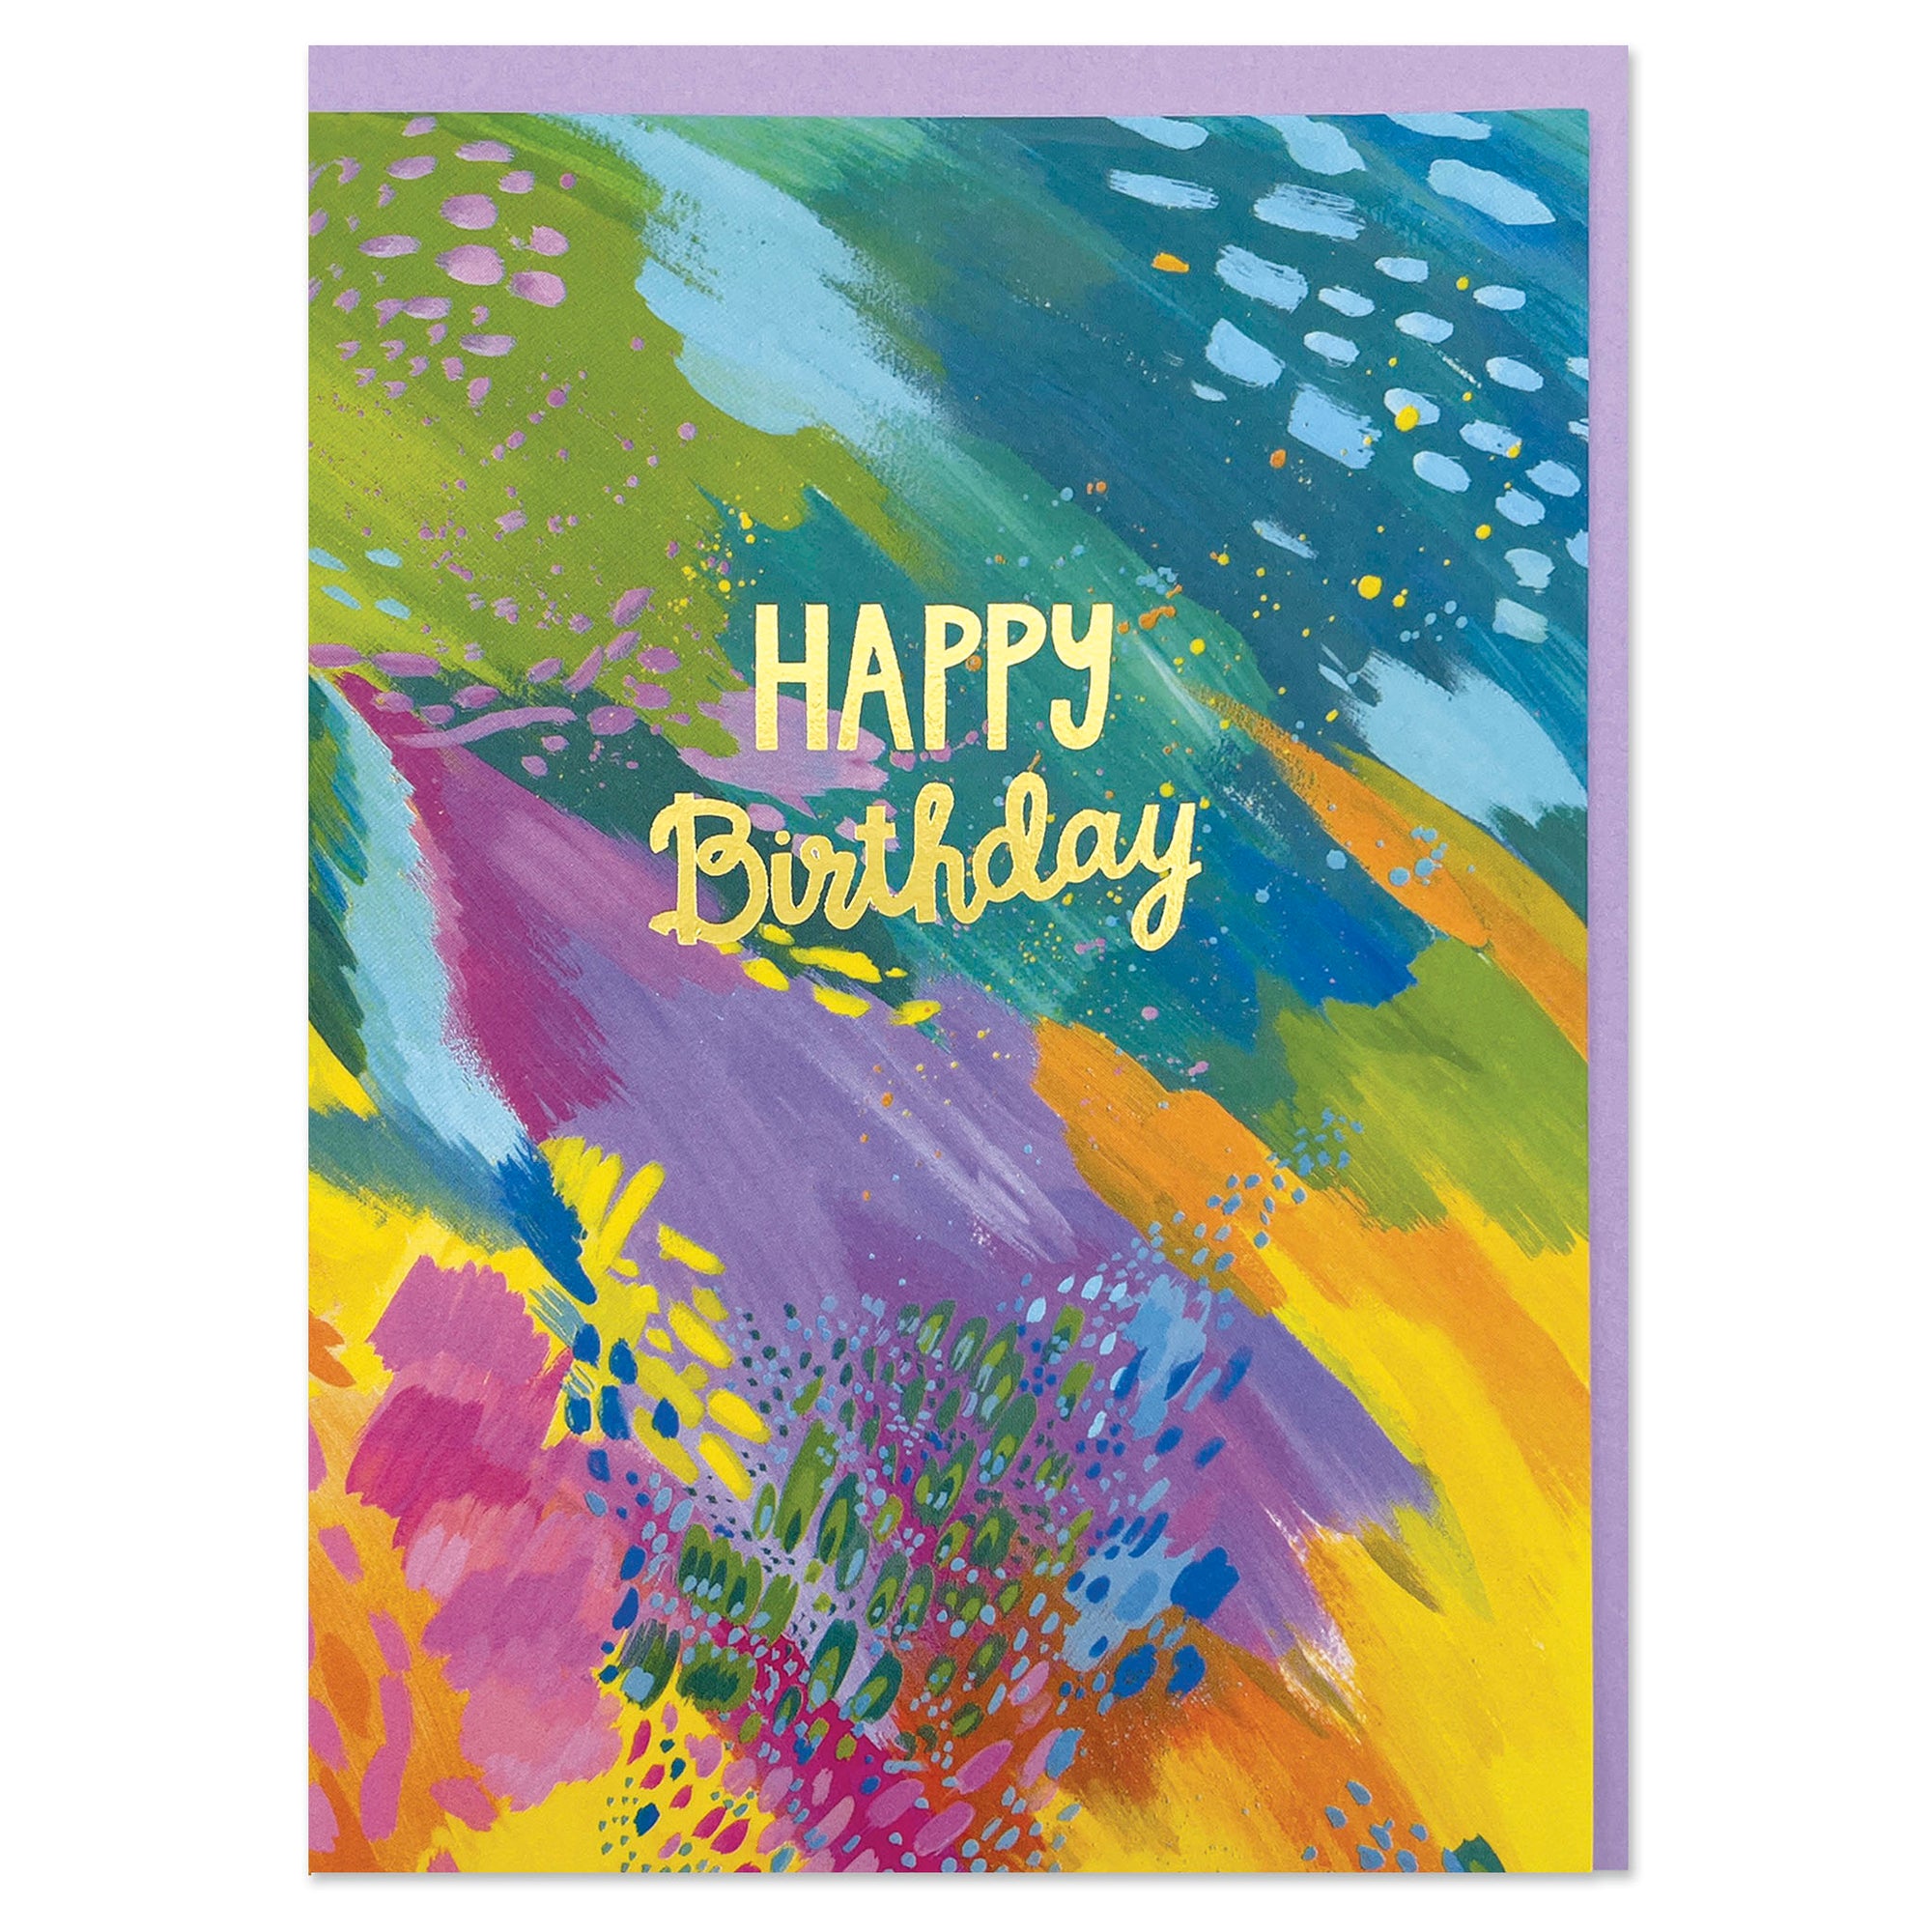 A colourful abstract painted greetings card to celebrate a birthday. The writing in the centre of the card is gold foil cursive writing stating 'Happy Birthday'.